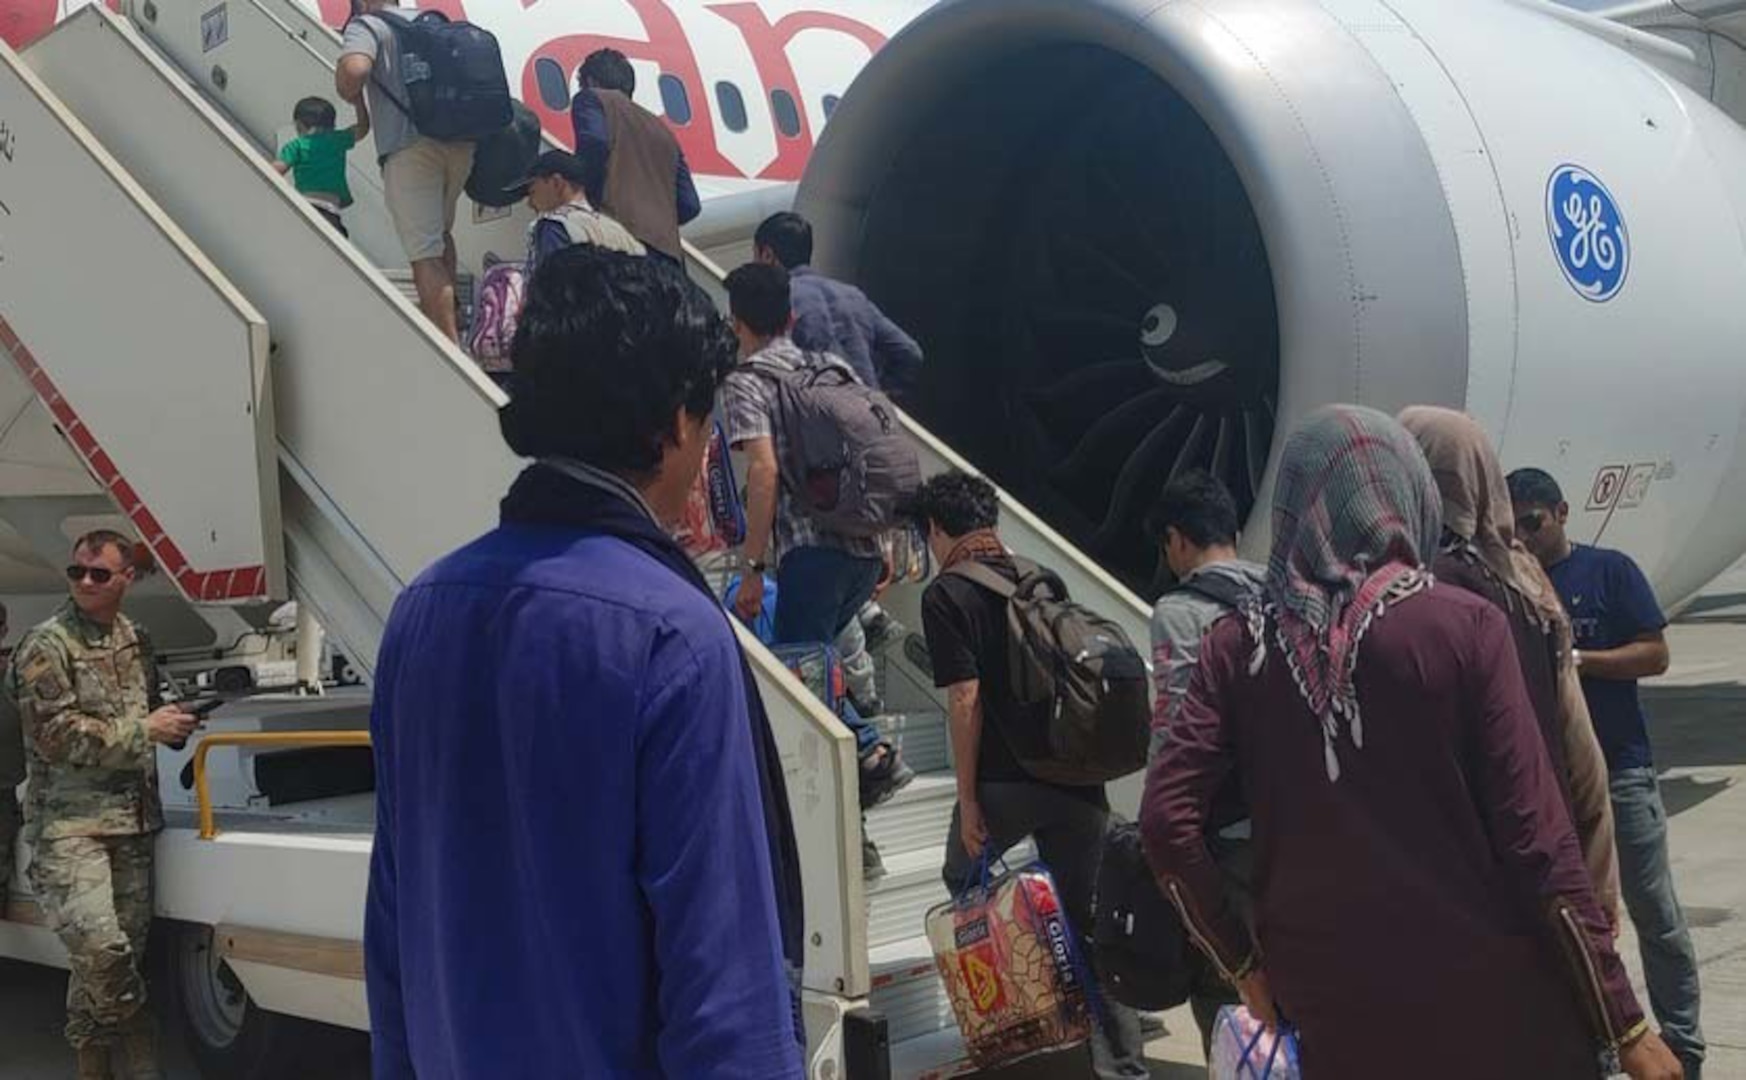 Afghan evacuees board a U.S.-chartered flight for their destination after a two-week stay in Kuwait, where they received medical screenings and were processed by Task Force Spartan personnel. Approximately 5,000 evacuees processed through Kuwait.